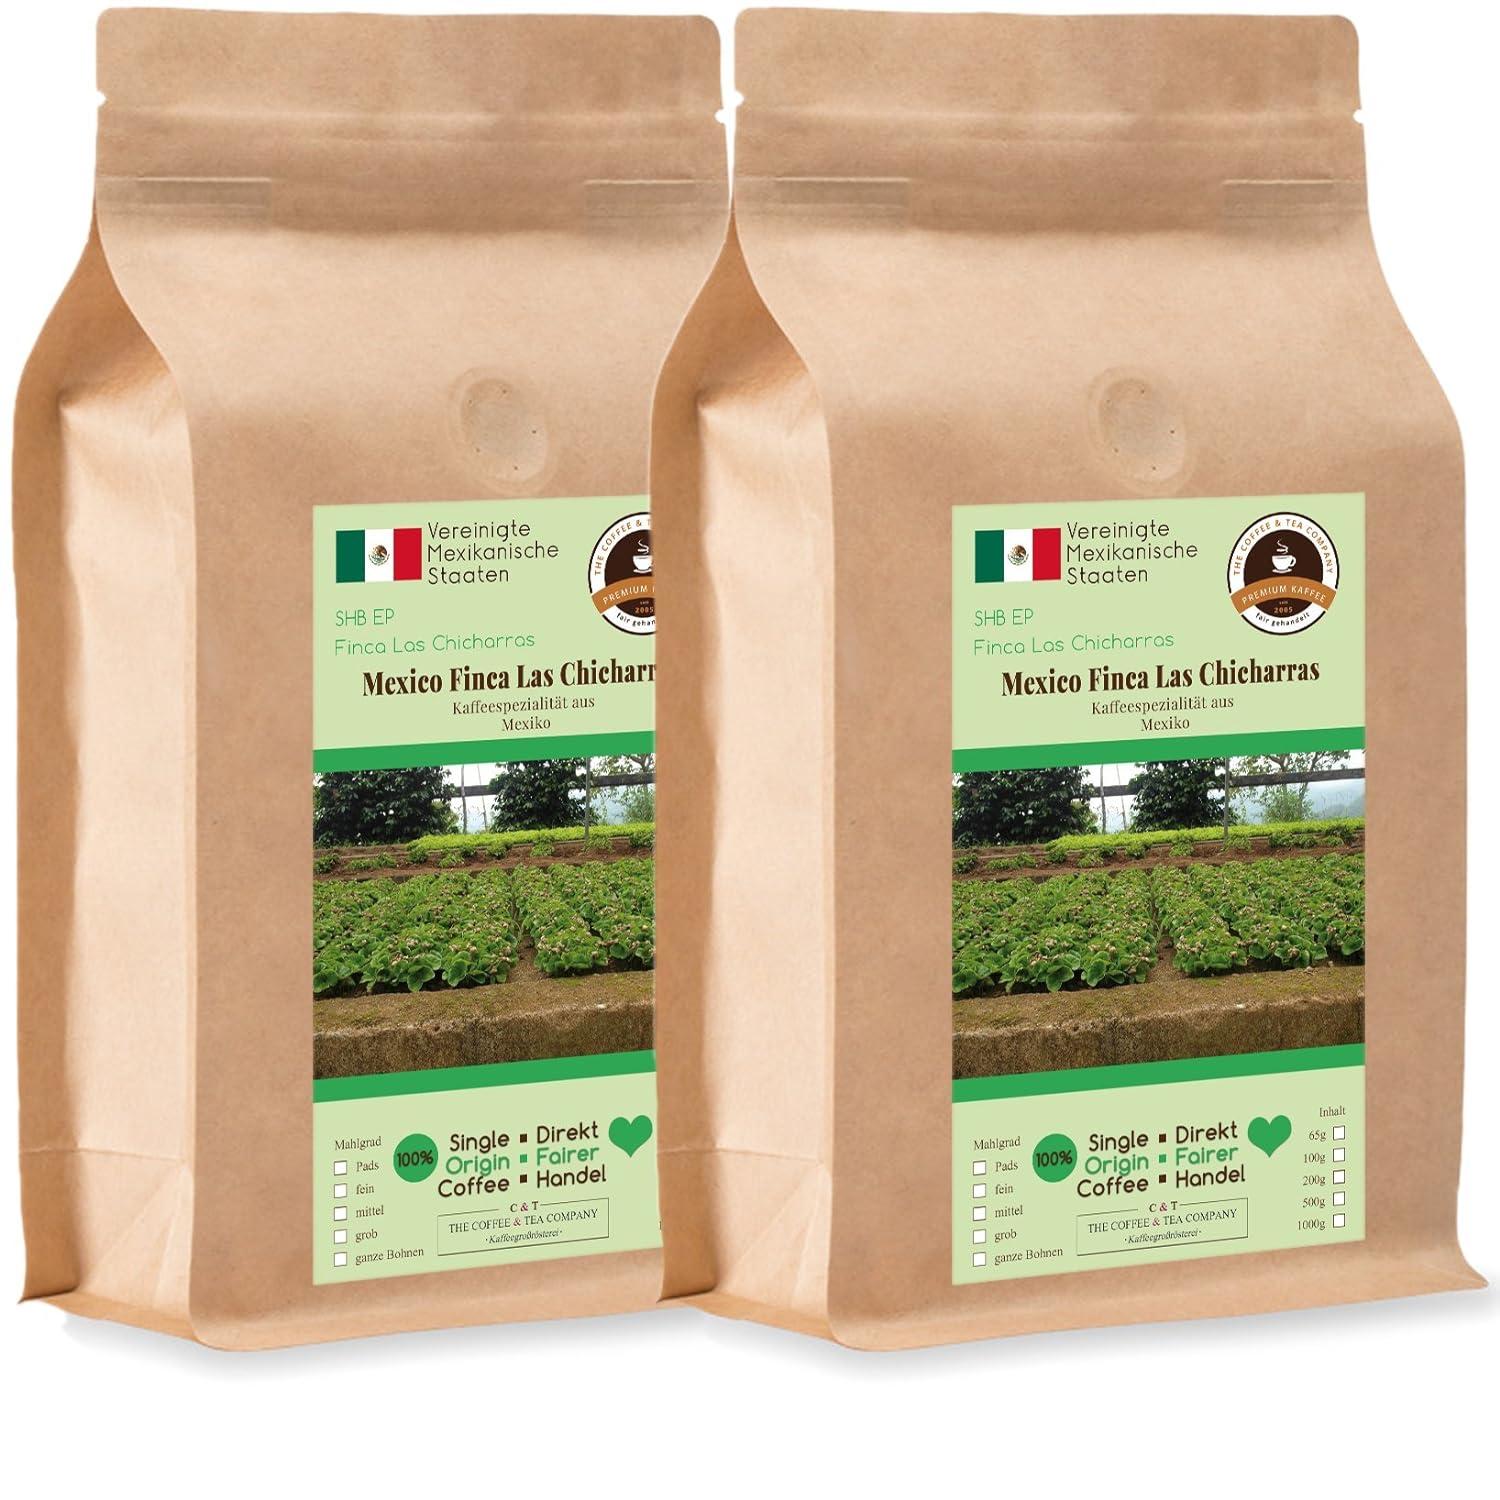 Coffee Globetrotter - Coffee with Heart - Mexico Finca Las Chicharras - 2 x 1000 g Finely Ground - for Fully Automatic Coffee Grinder - Roasted Coffee Fair Trade | Refill Pack Economy Pack